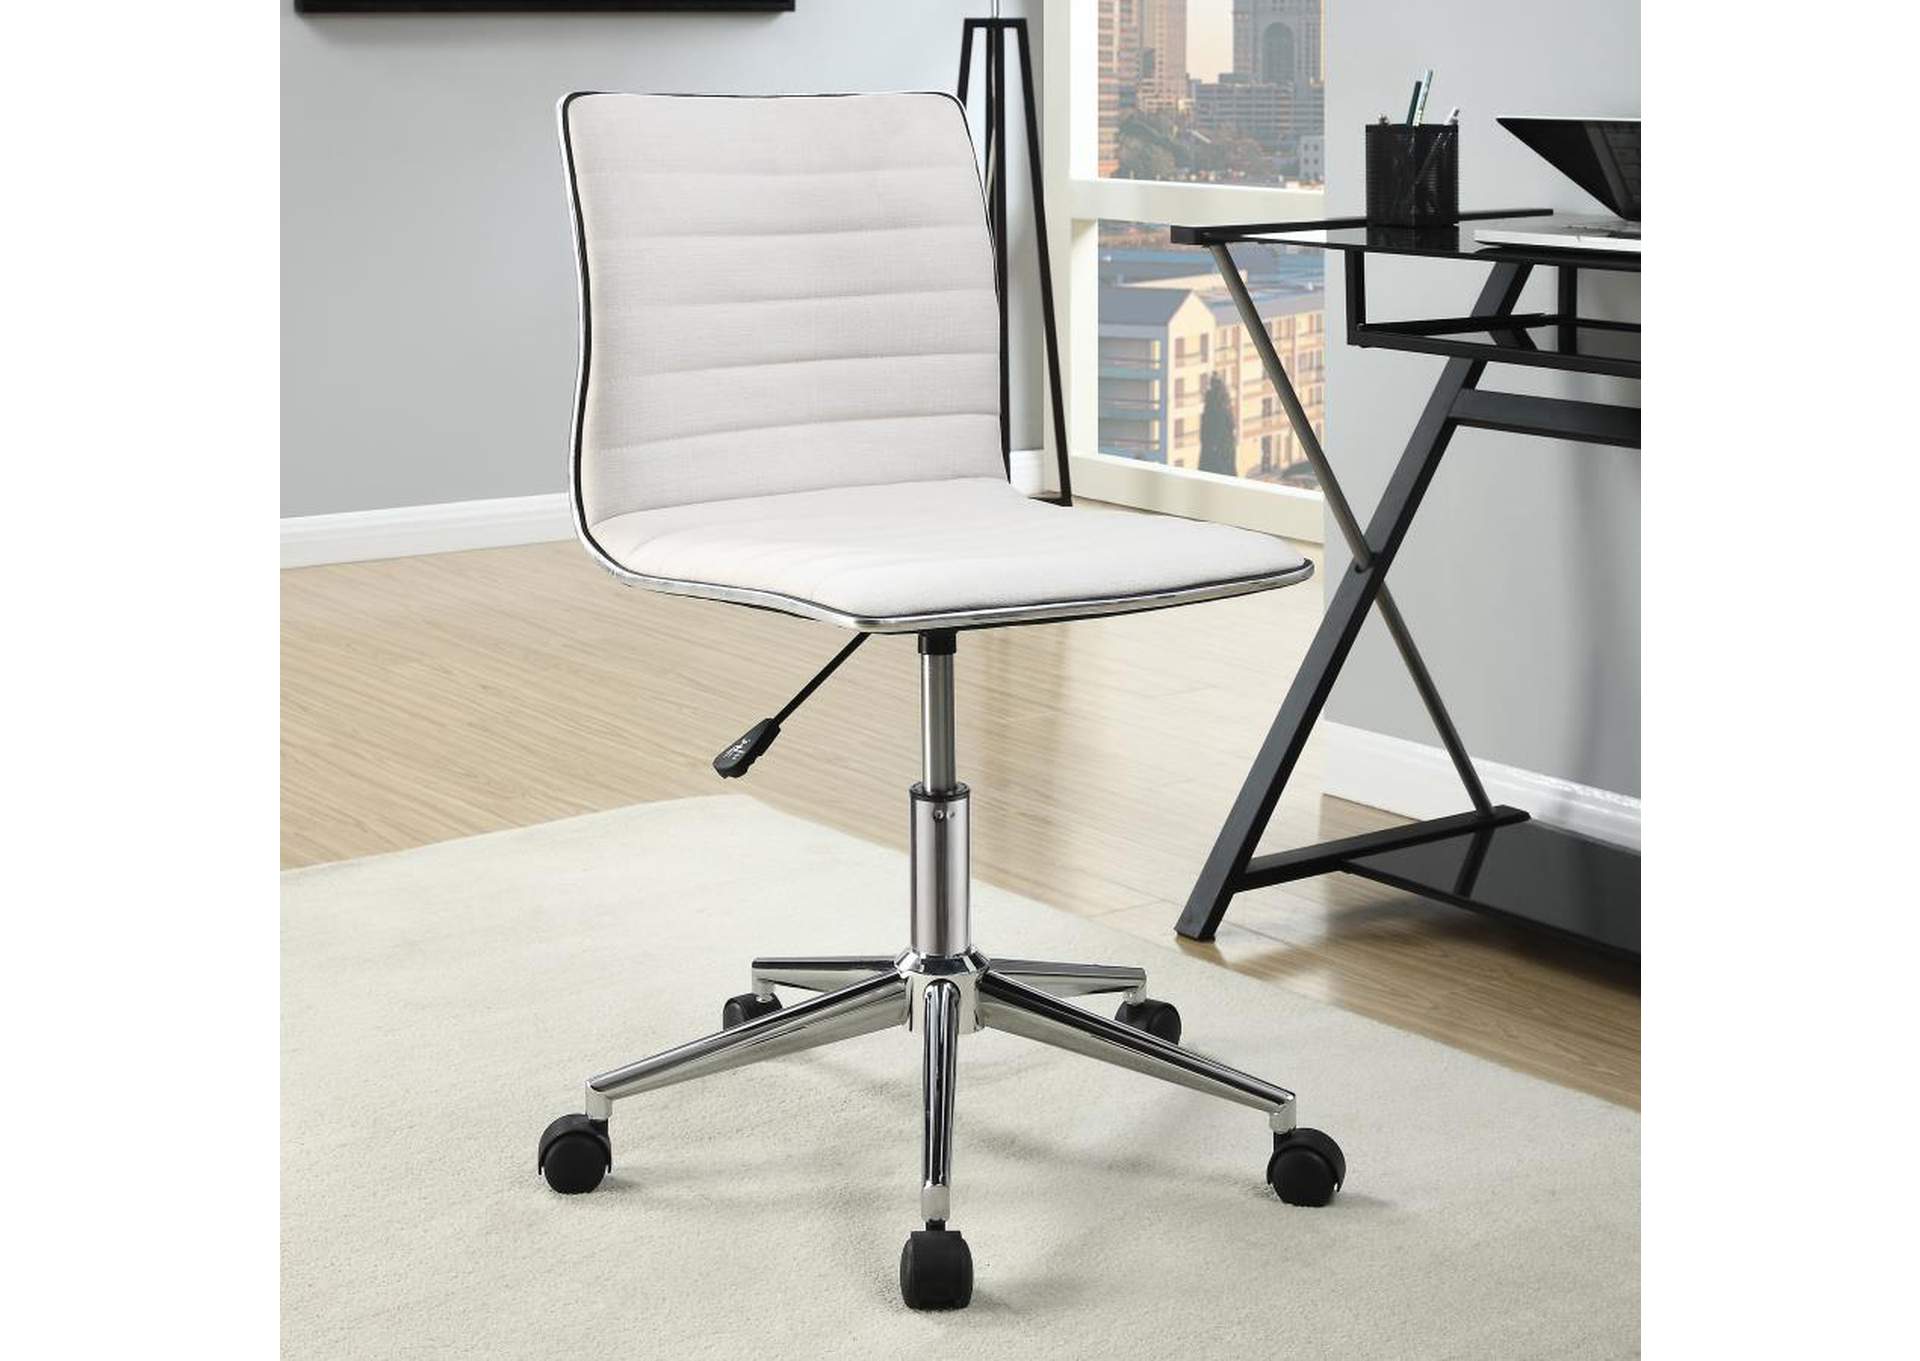 Adjustable Height Office Chair White and Chrome,Coaster Furniture